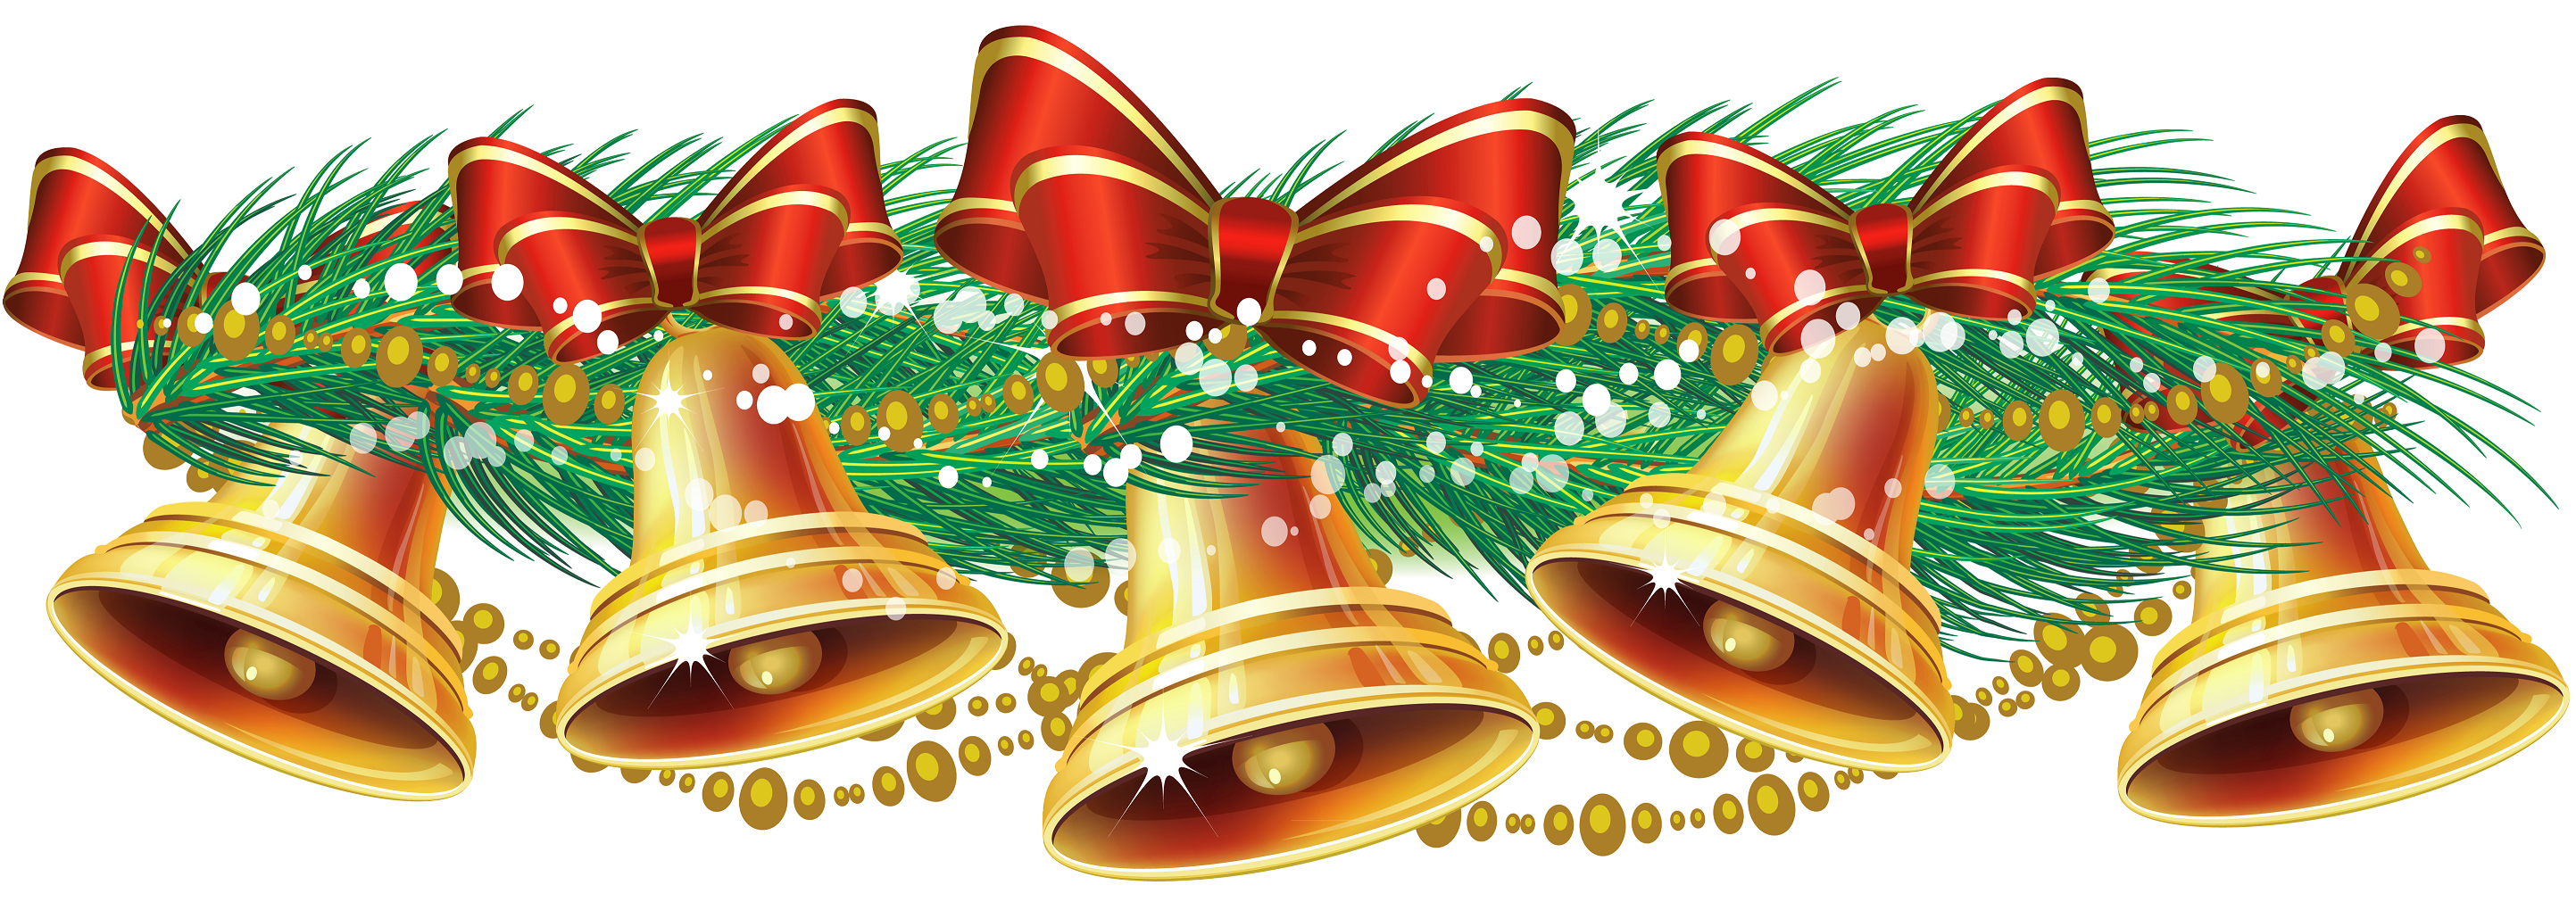 Christmas bell border | Clip Art Holiday Scrapbook, Cards, Images ...